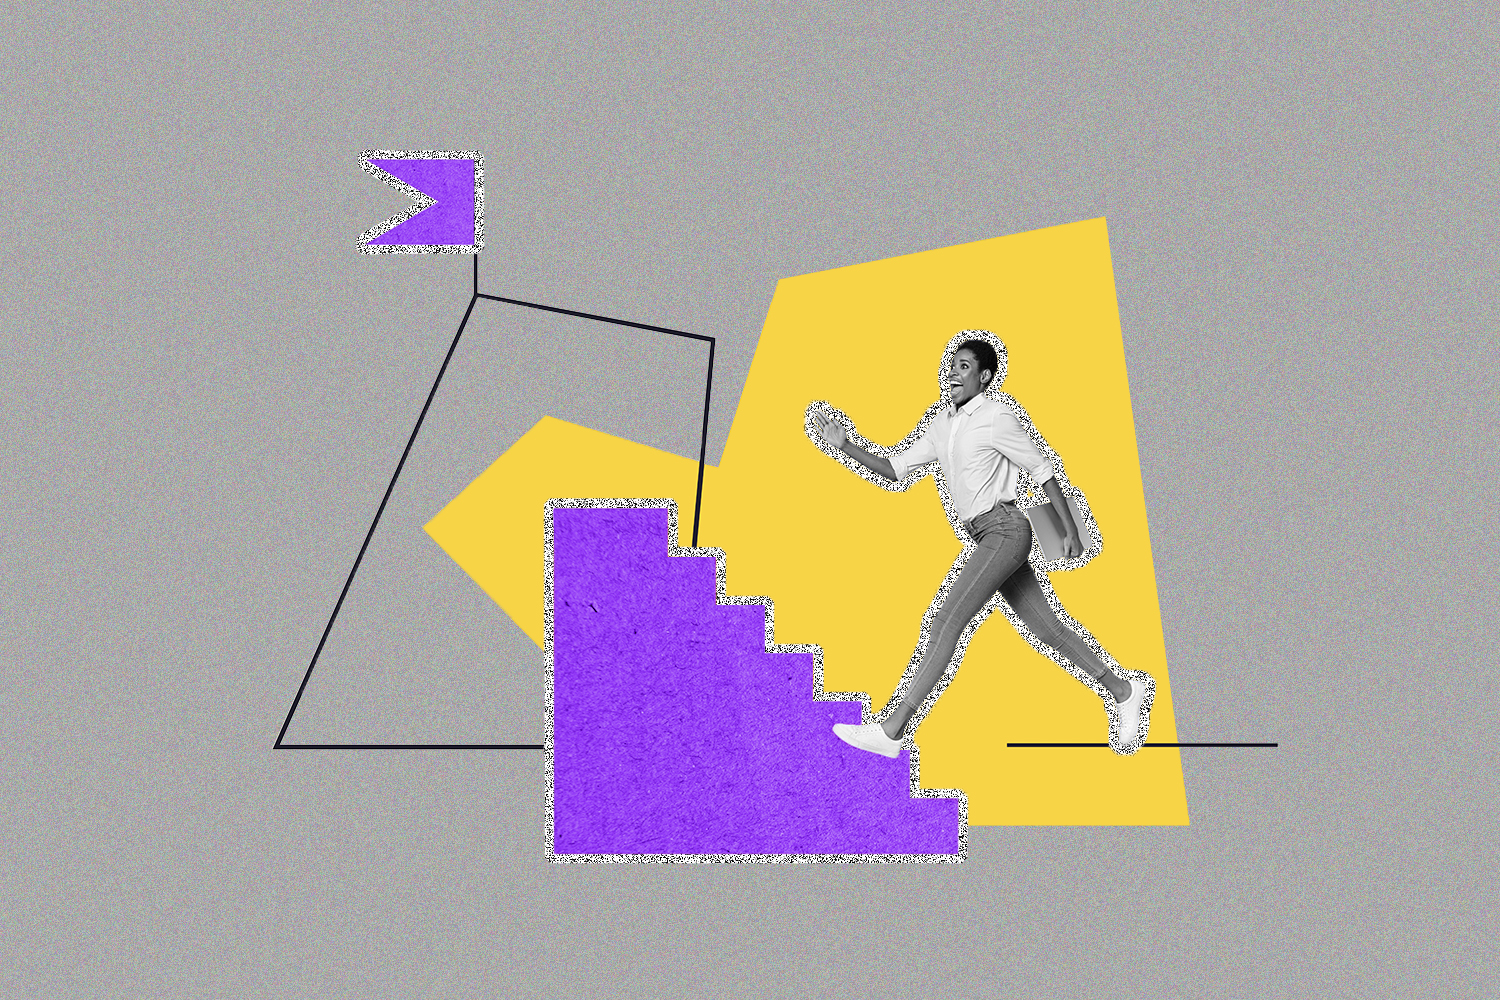 A person walking up a purple set of stairs toward a purple flag, on a yellow and gray background